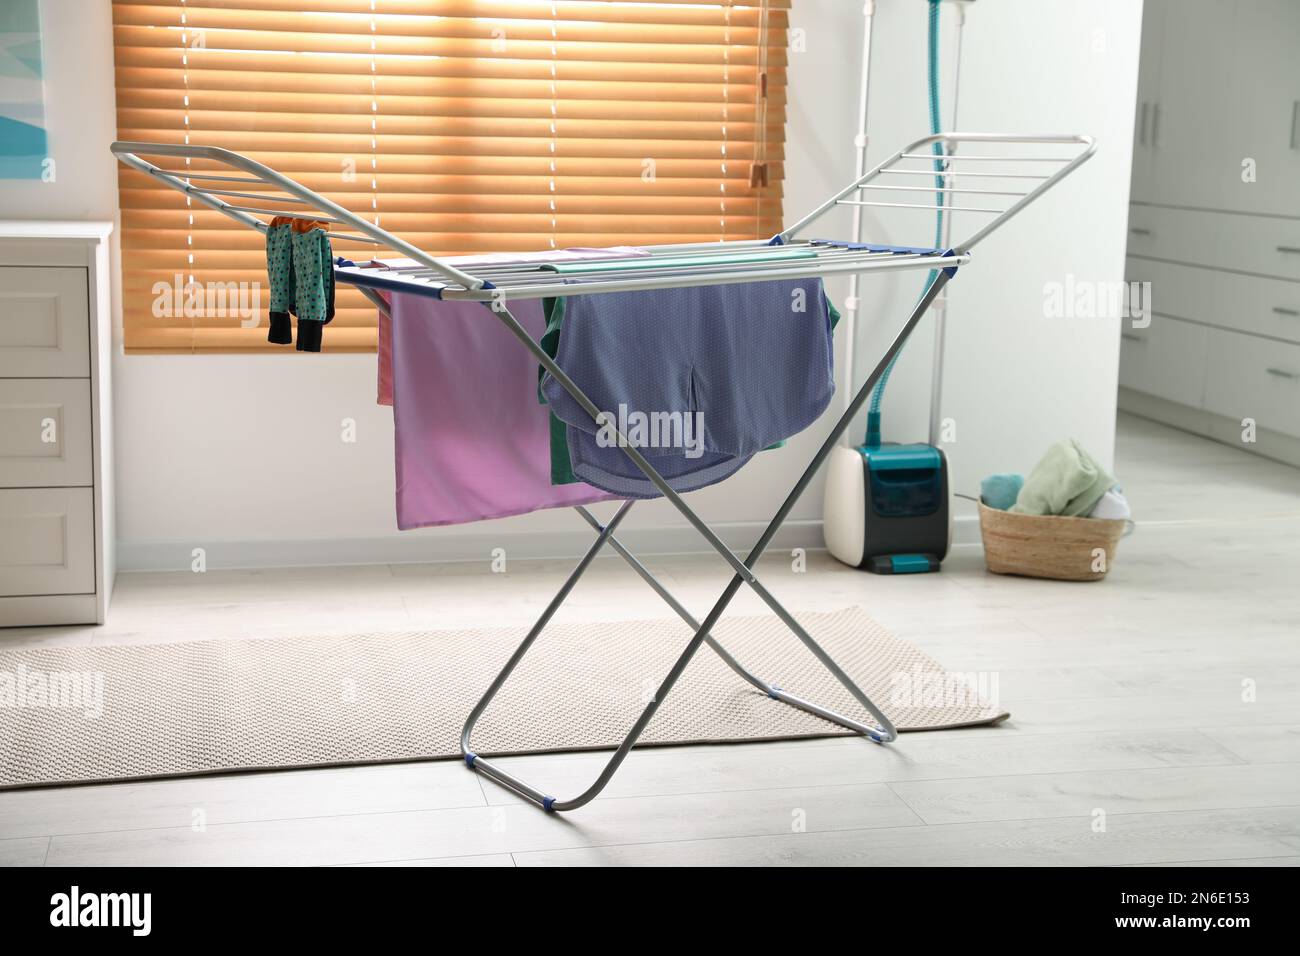 Clean laundry hanging on drying rack indoors Stock Photo